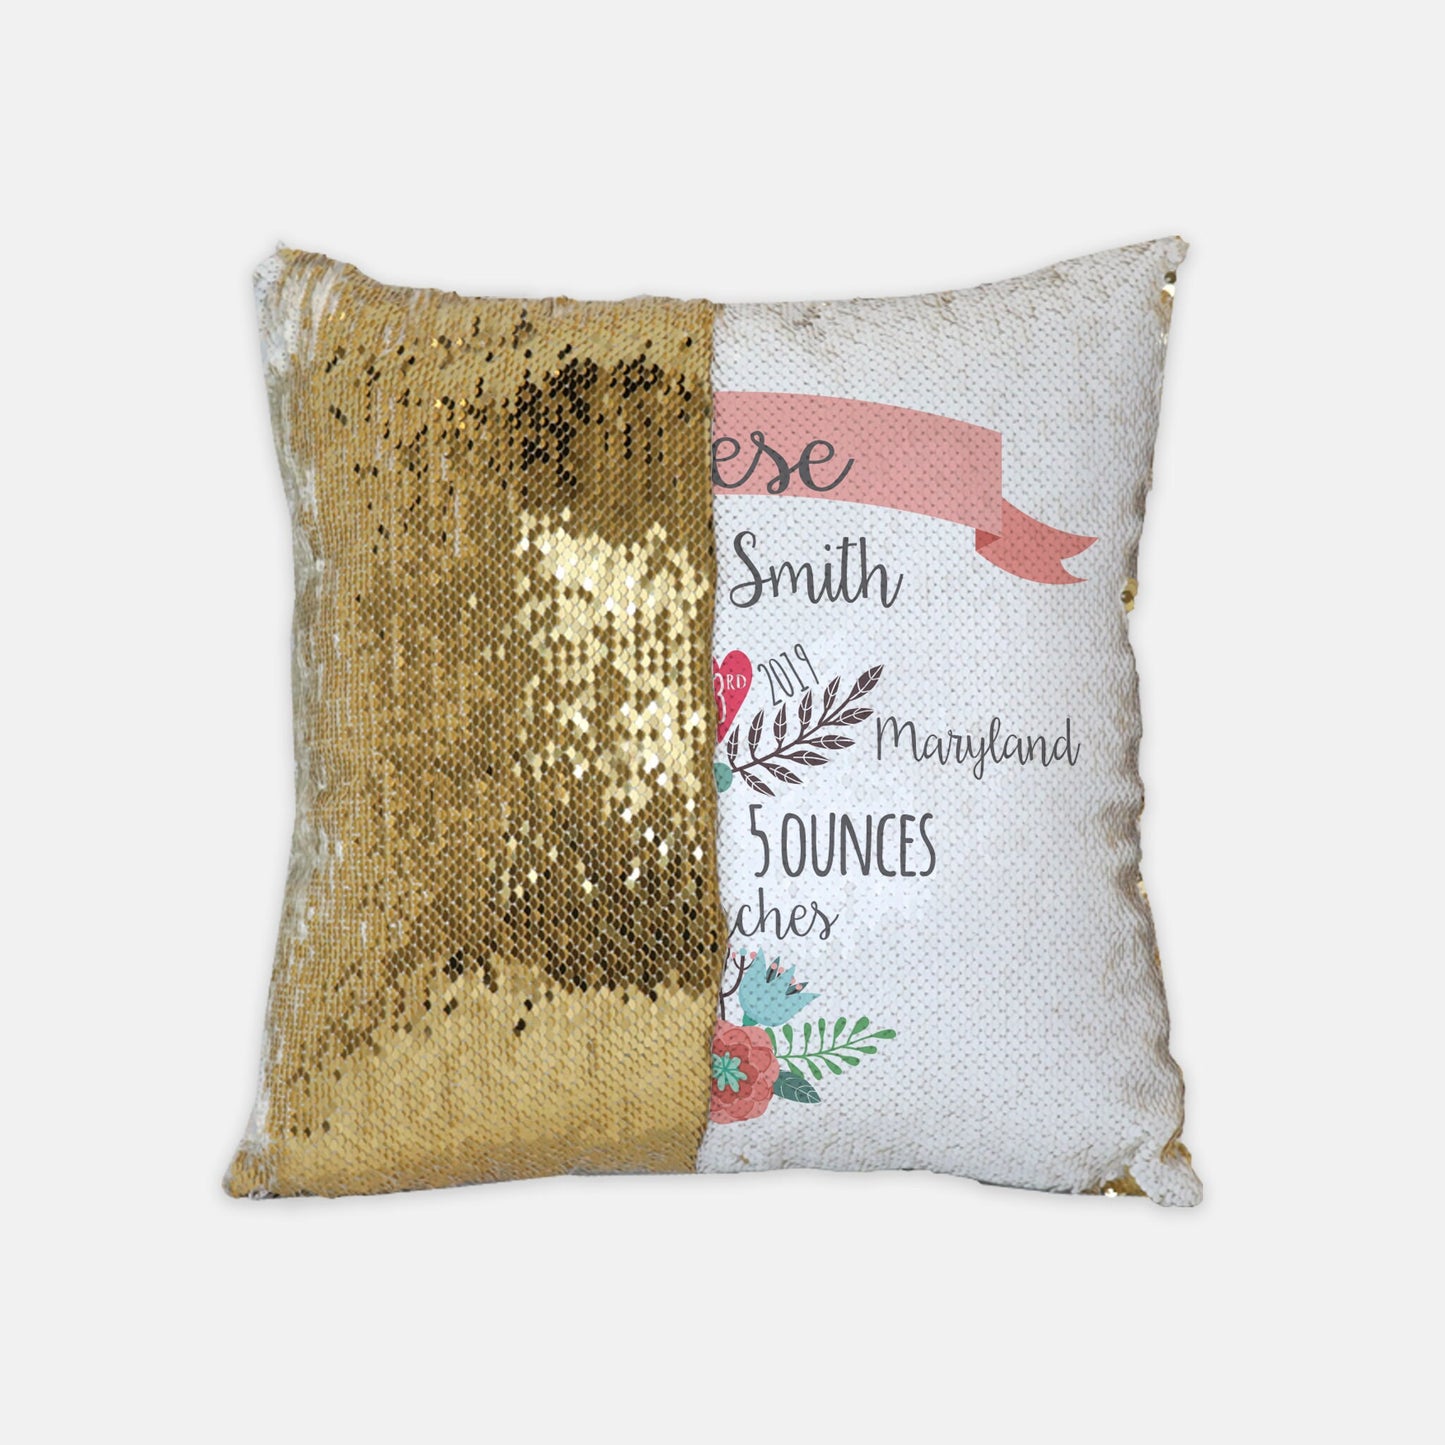 Sequin Girl Birth Stats Announcement Pillow - Personalized Name Baby Pillow - Baby Gift - Girl Nursery Decor - Newborn Pillow